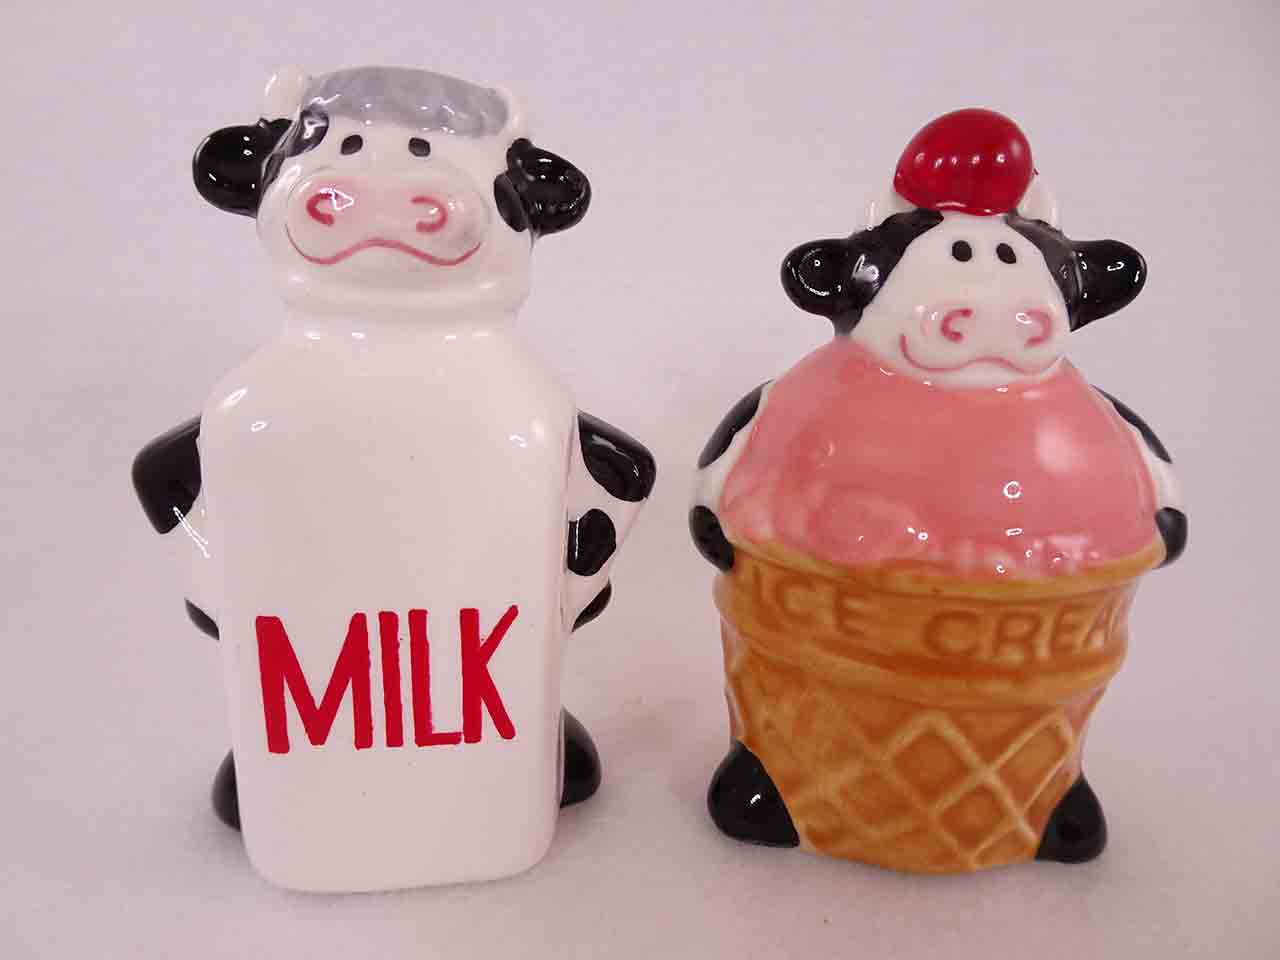 Clay Art Animals in Costumes salt and pepper shakers - cows dressed up as an ice cream cone and milk